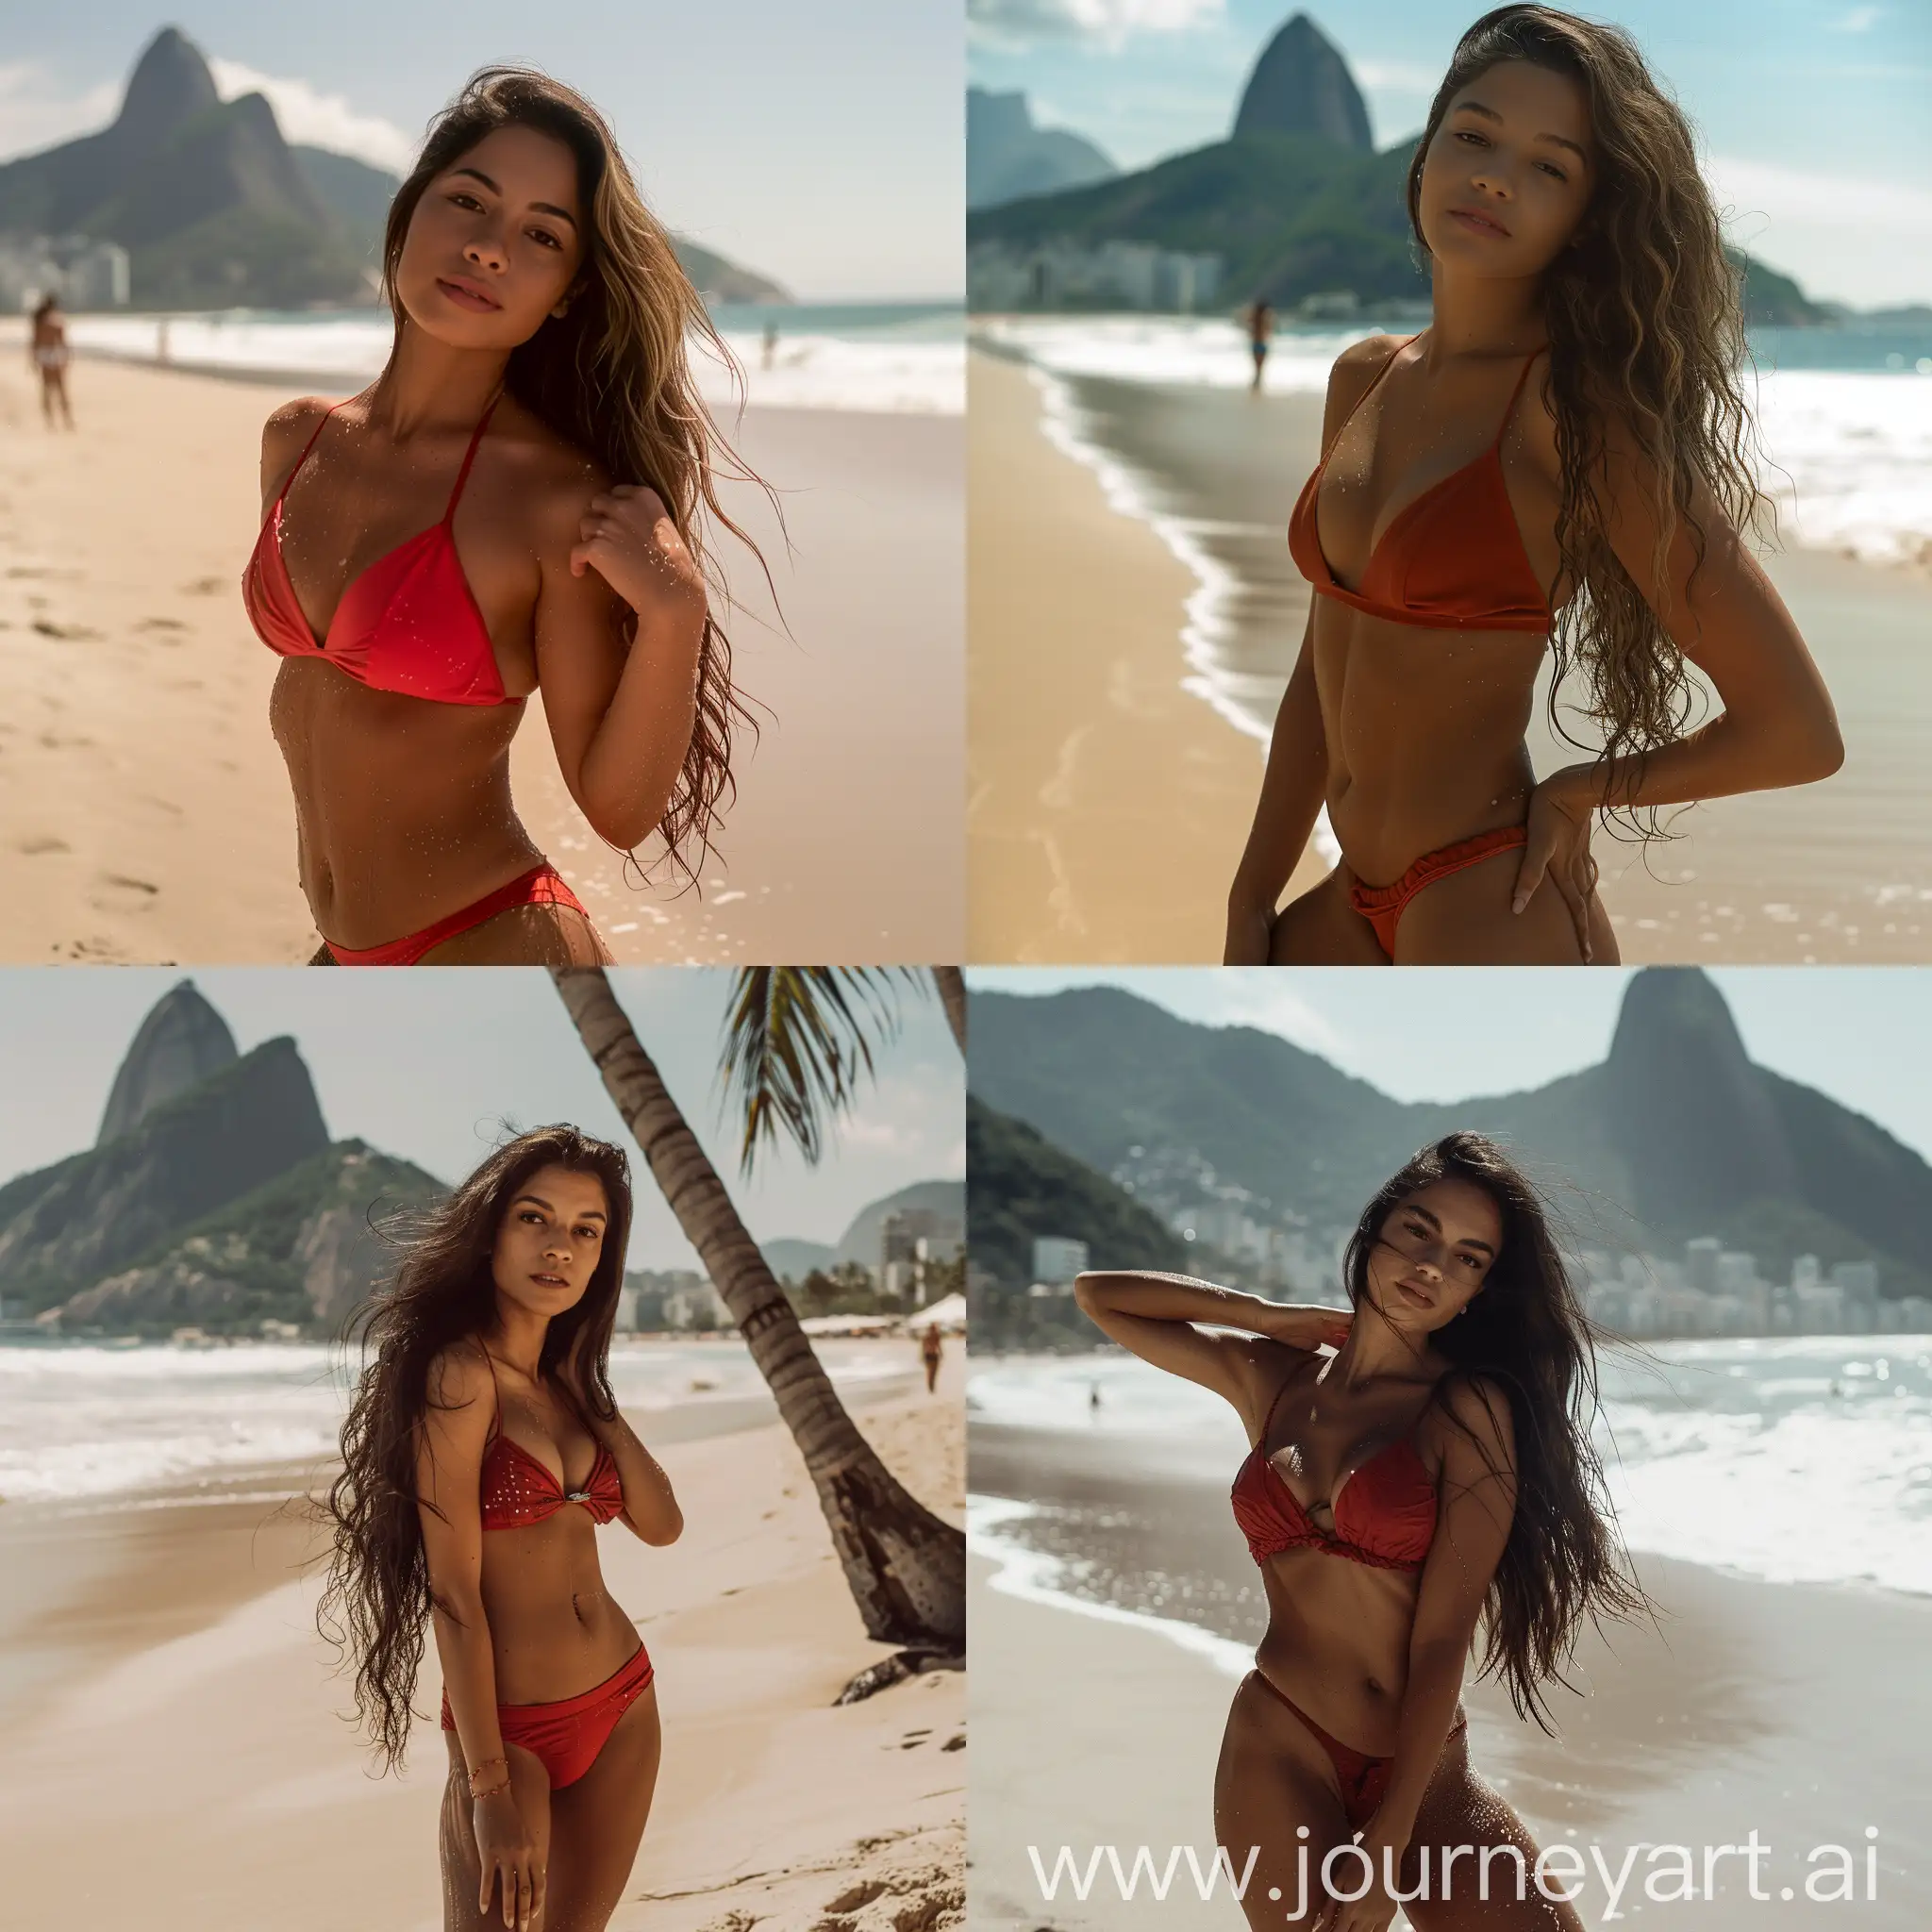 A Latina woman with slightly tan skin, long loose hair, with a stylish and attractive appearance, in a beach setting in Rio de Janeiro, the image should be very realistic, capturing the model's natural beauty and the stunning beach scenery, she is posing standing up, with one leg slightly bent, one hand on her waist, and the other playing with a strand of hair, her gaze is captivating, looking at the camera, with a soft smile on her lips, she is wearing a red bikini that accentuates her curves, highlighting her slender and toned silhouette, the sunlight shines on her skin, creating a luminous effect that makes her stand out even more, in the background, we see the white sand of the beach, the crystal blue sea, and the iconic Sugarloaf Mountain in the distance, some palm trees gently swaying in the breeze, and there is a slight impression of people enjoying the day in the background, keeping the main focus on the model, additional details to make the image more realistic, the texture of the sand under her feet, small drops of water on her skin, as if she had just come out of the sea, light reflections in her hair, natural shadows created by the sunlight.